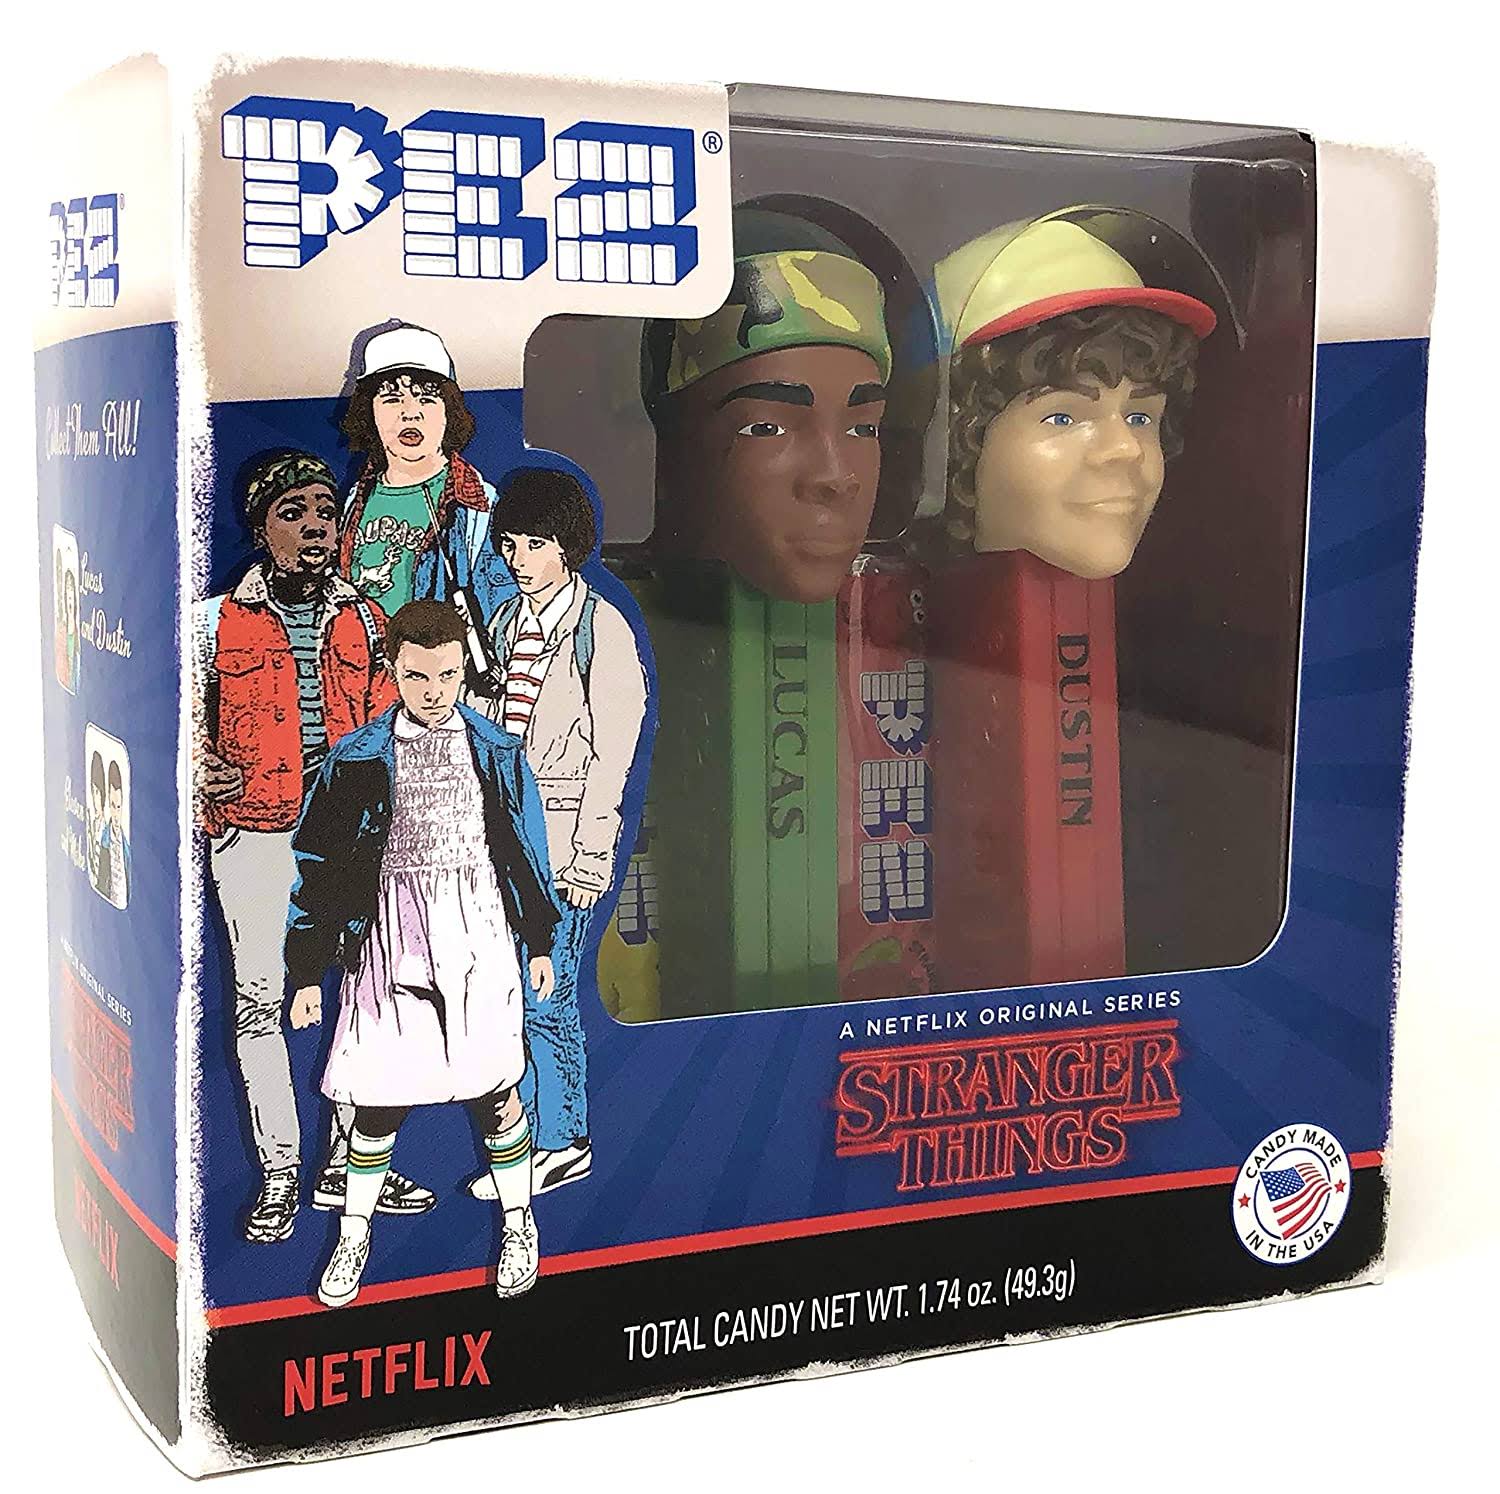 Pez Stranger Things Gift Set Sweets Dispensers And 6 Candy Packs 49.3g